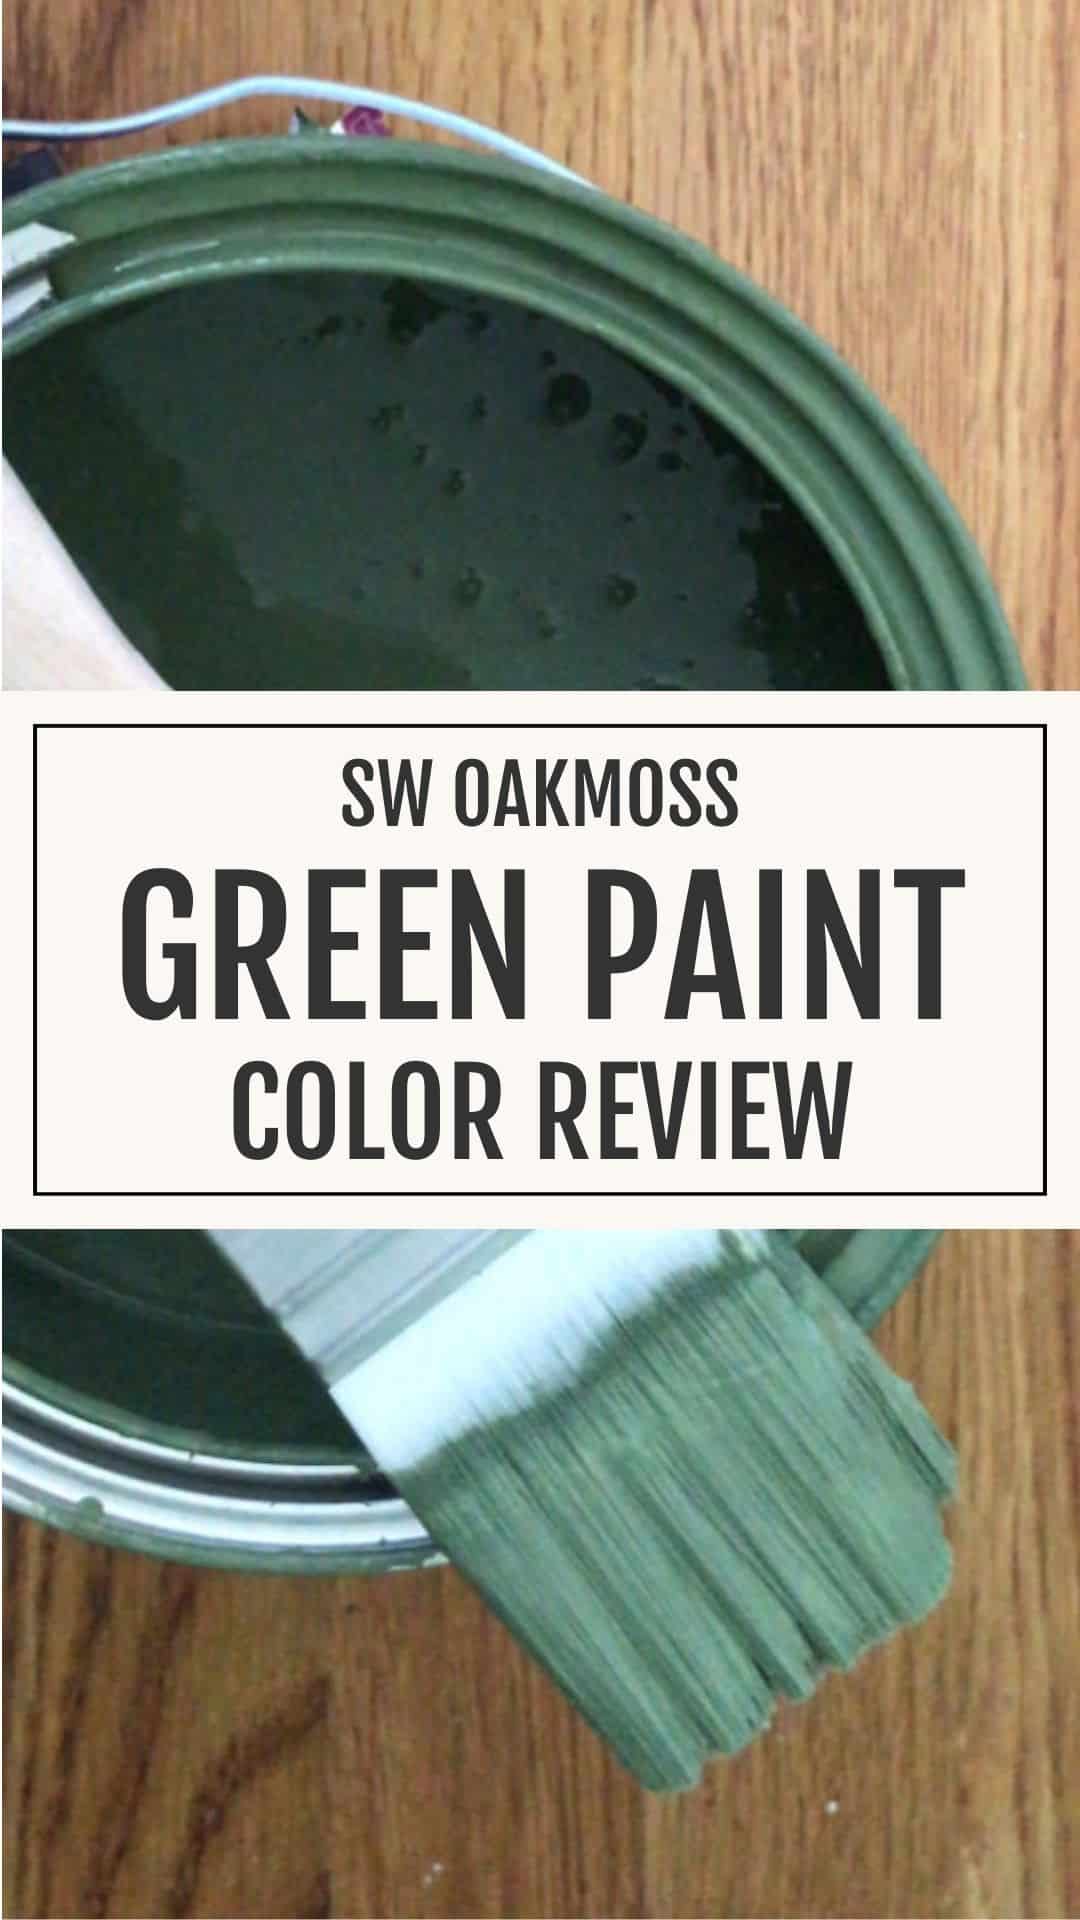 Can of sherwin williams oakmoss paint color